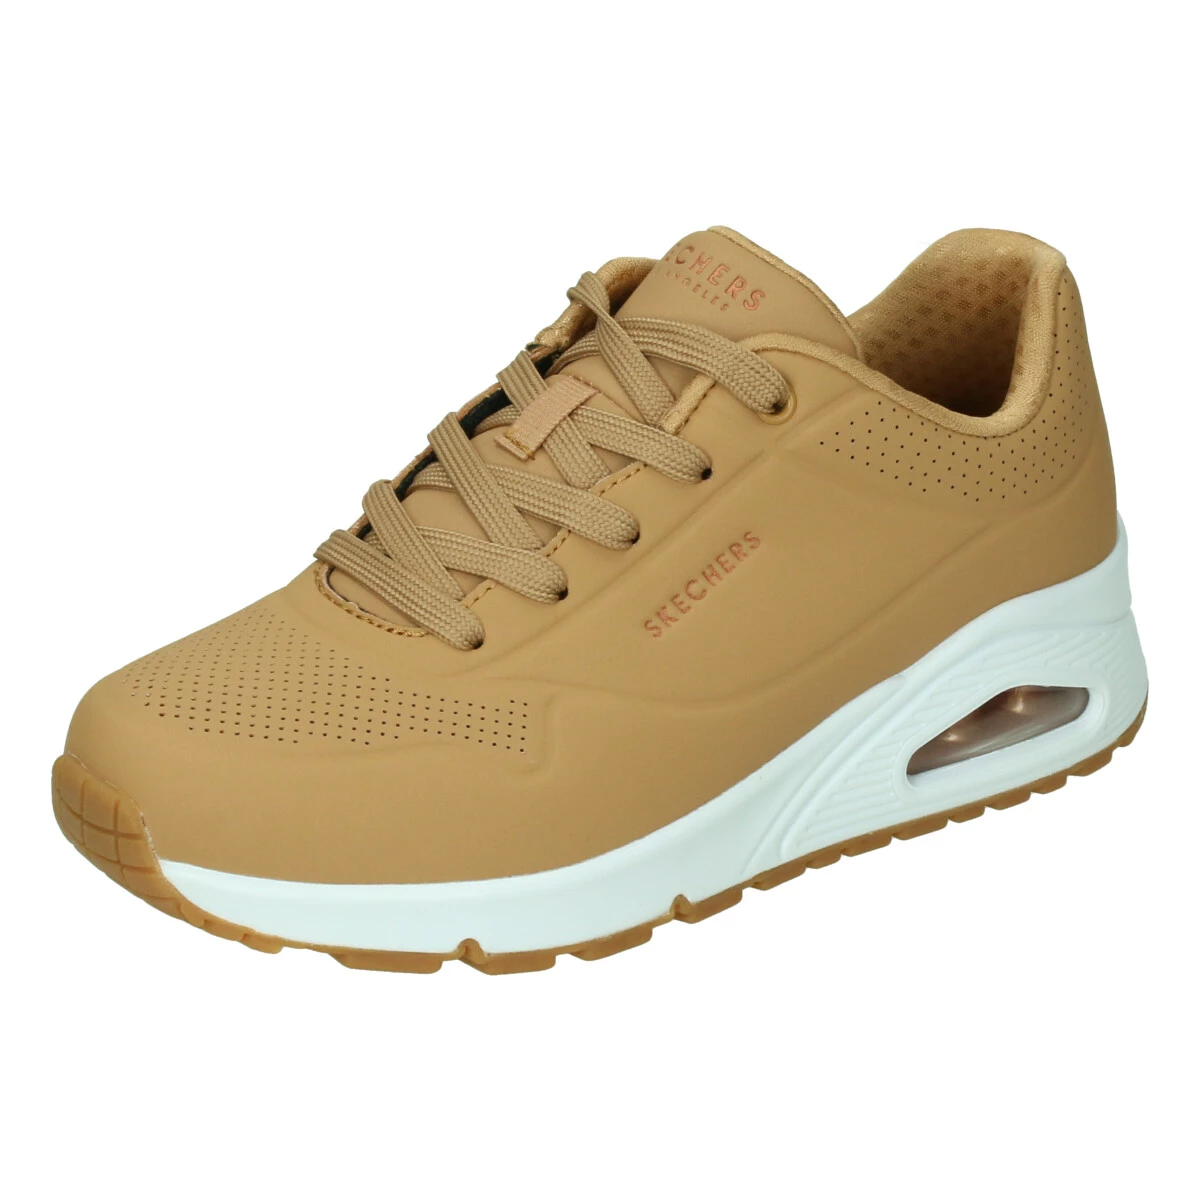 Skechers UNO STAND ON sneakers